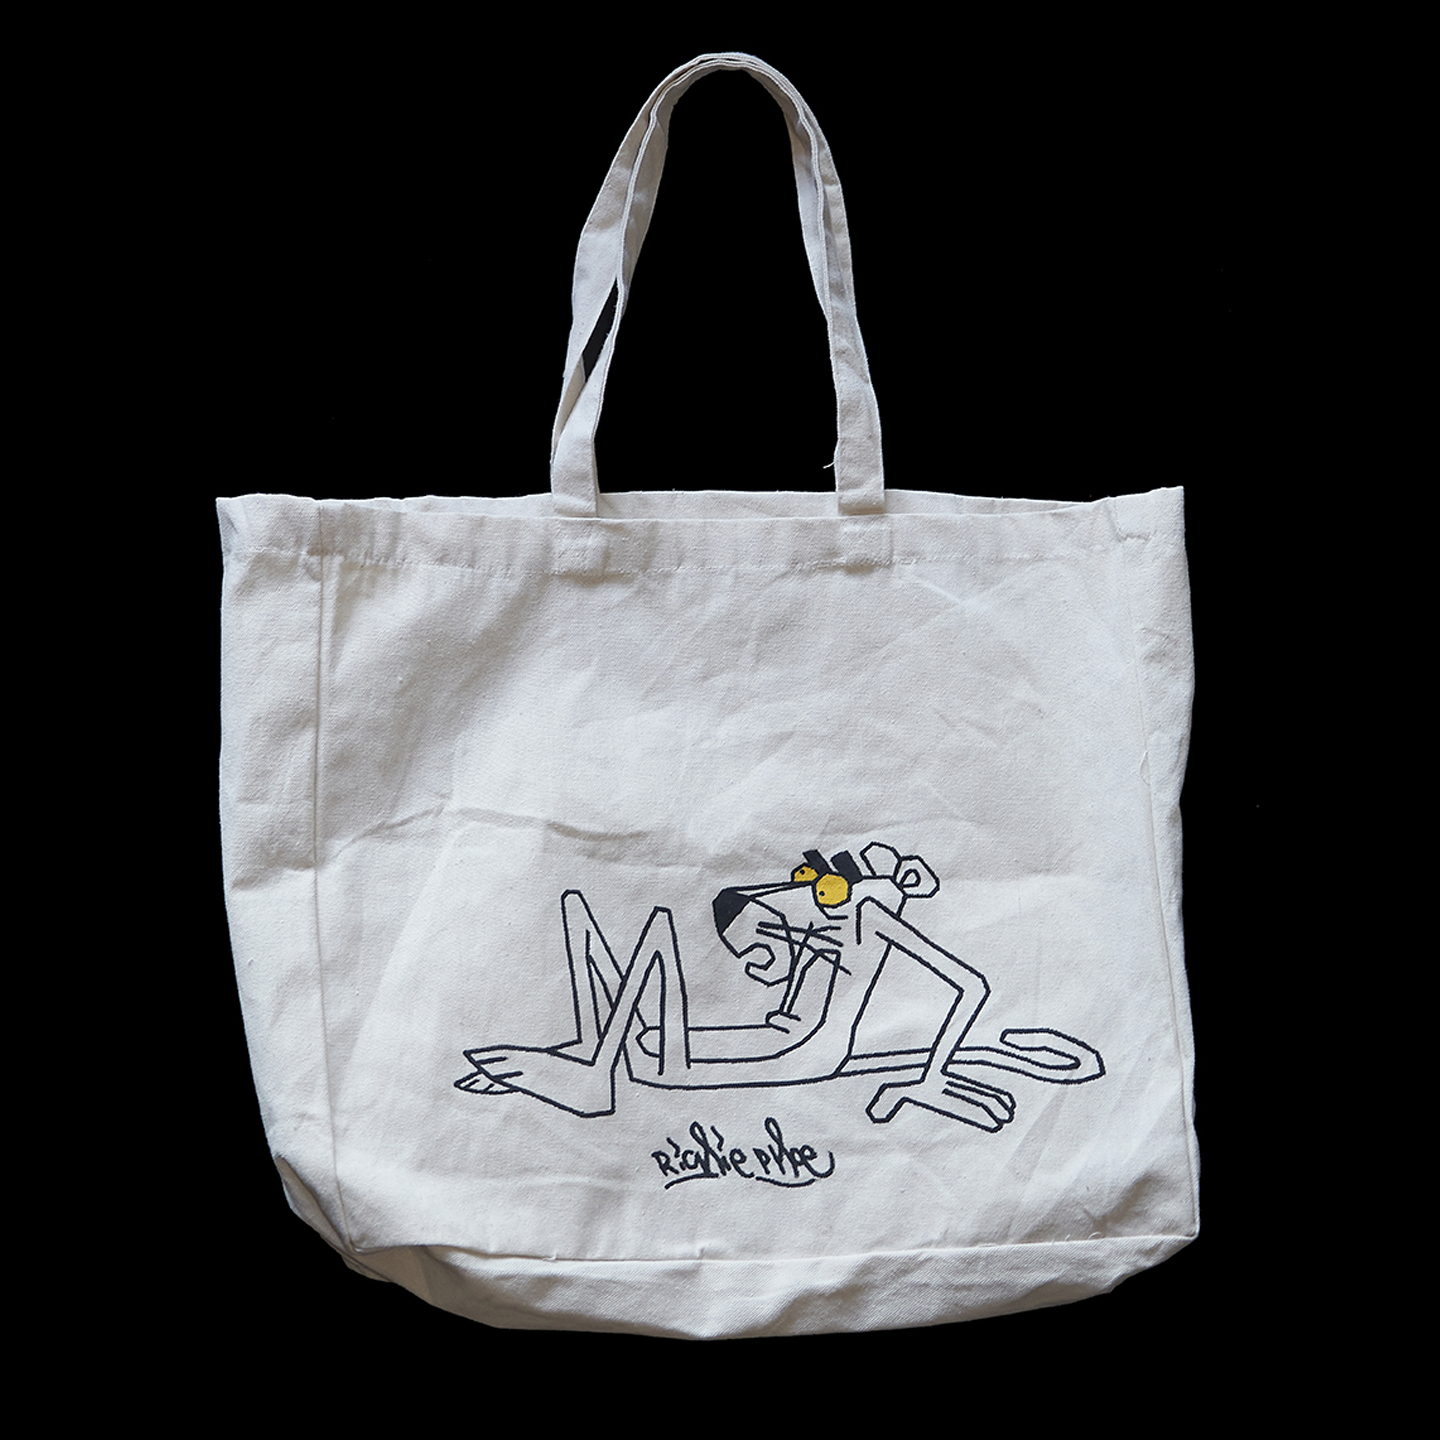 Richie Phoe Tote - Home